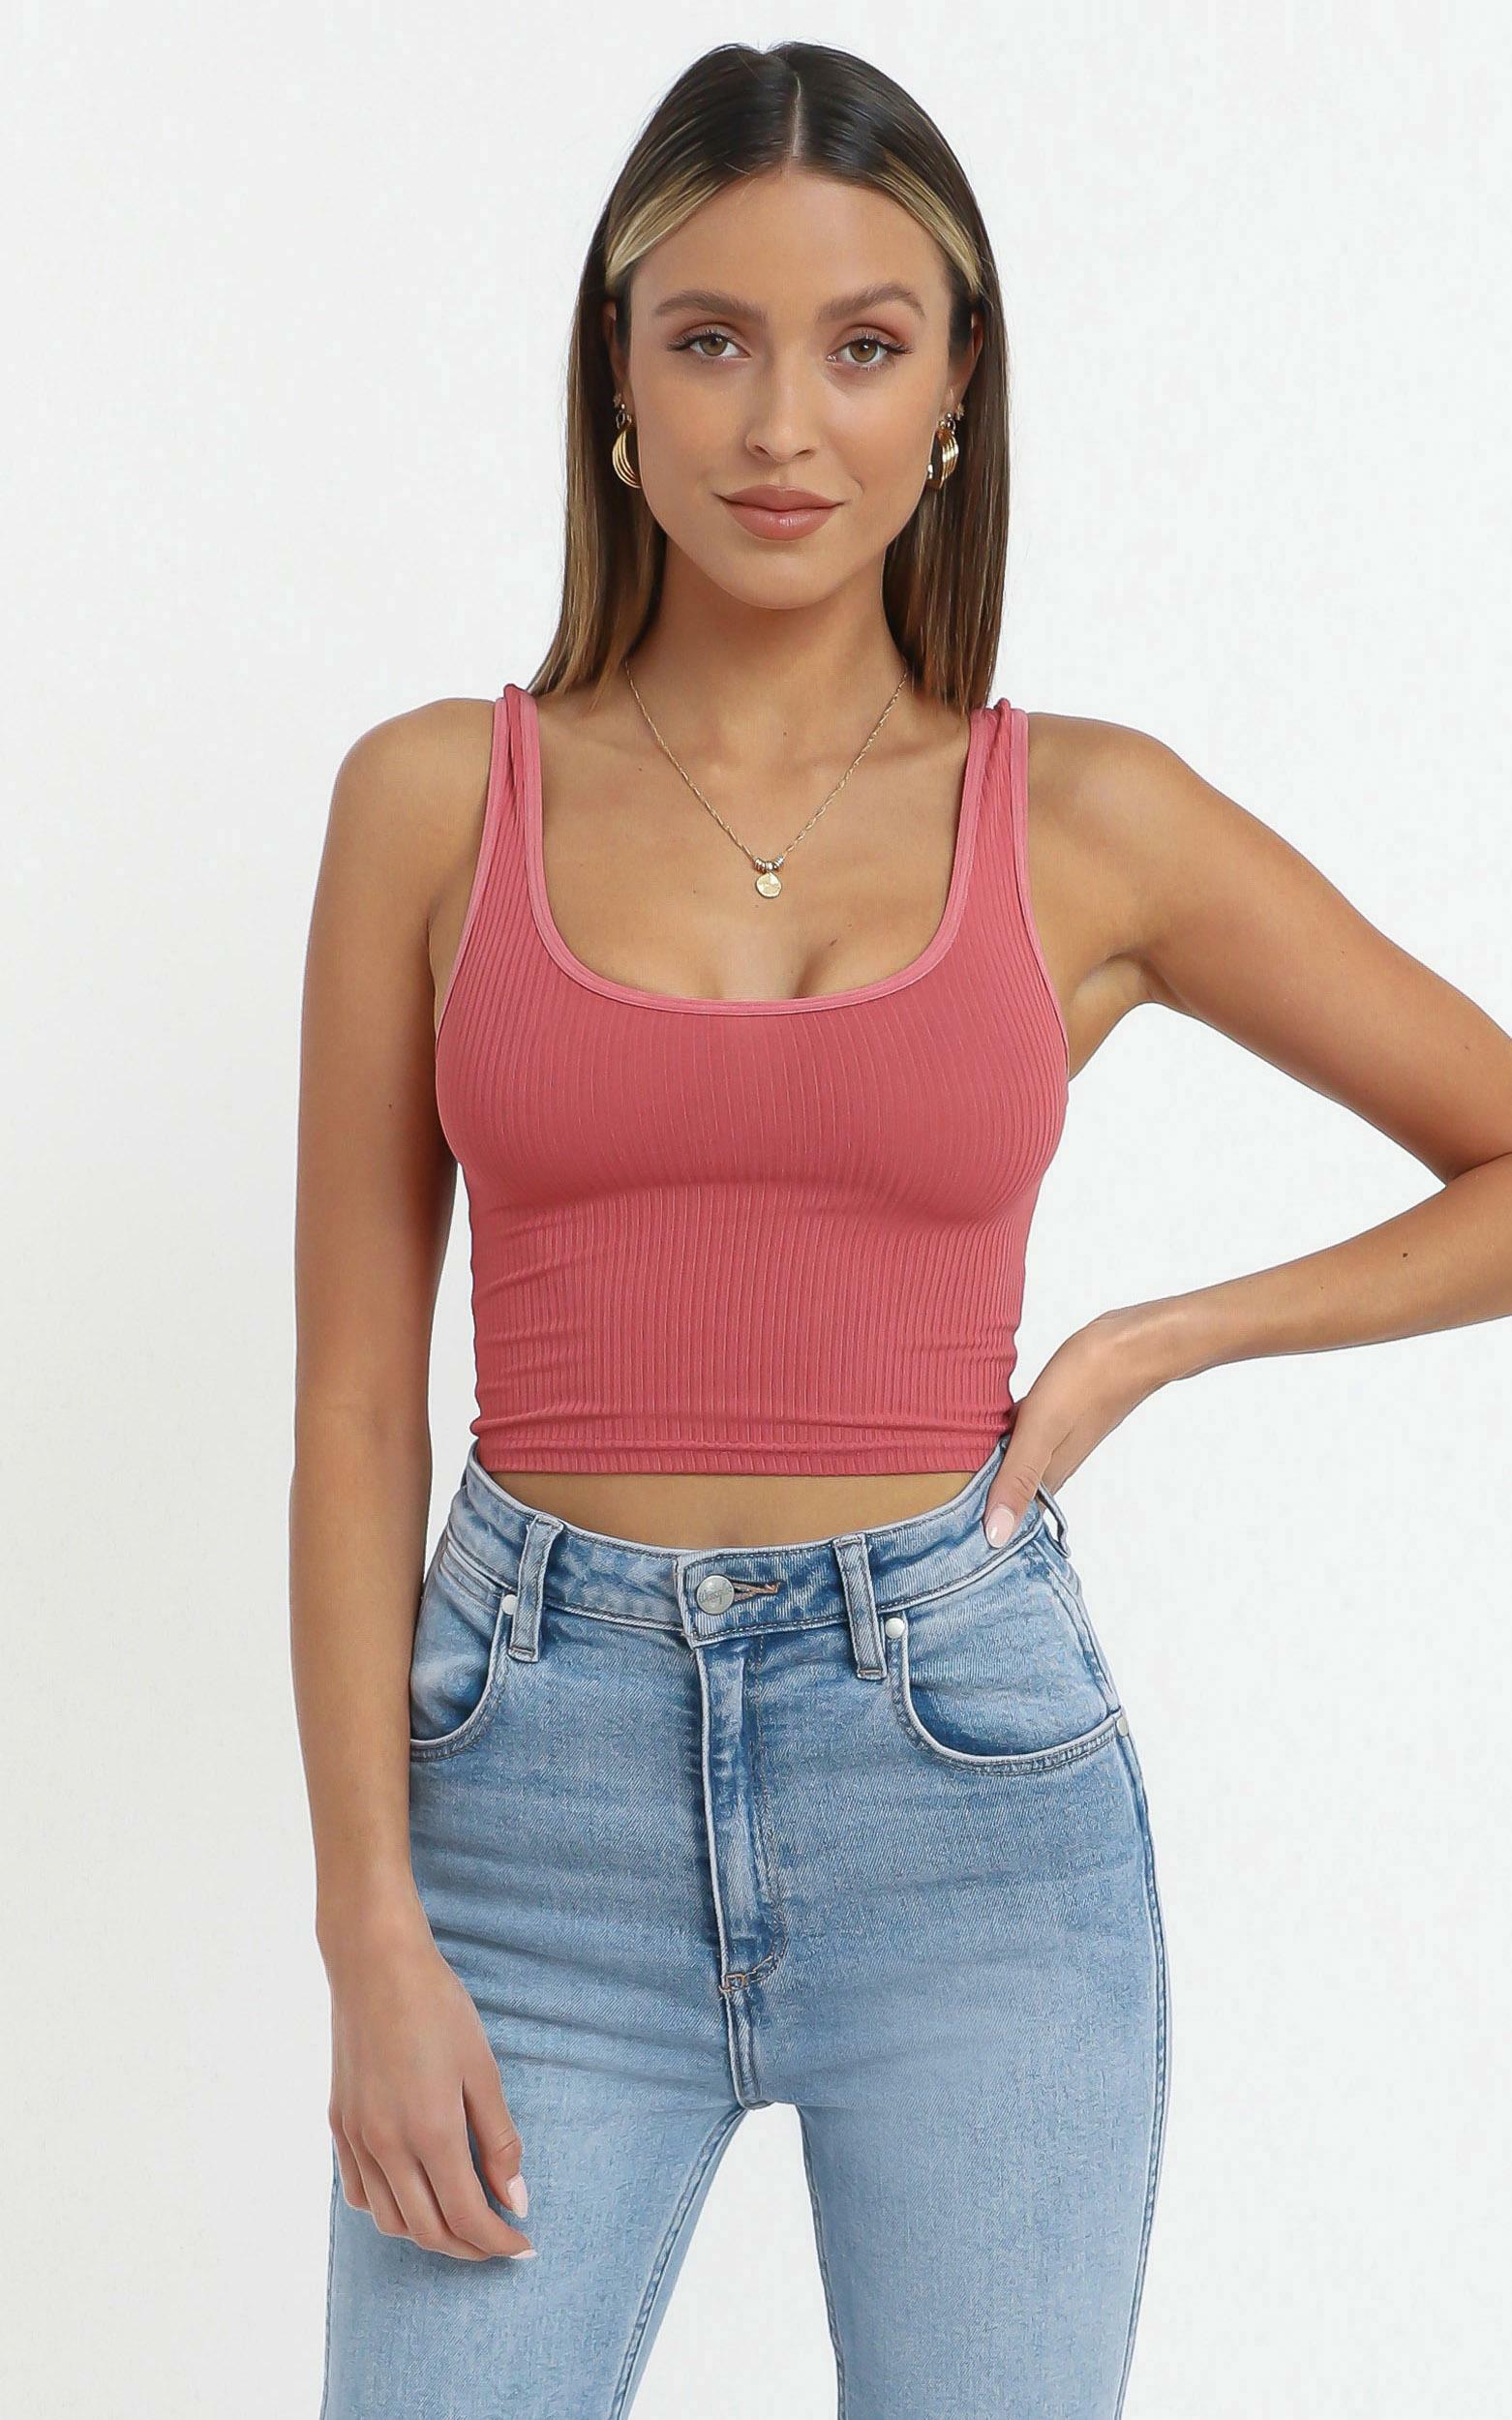 Eilley Top in Rosehip - 12 (L), Red, hi-res image number null